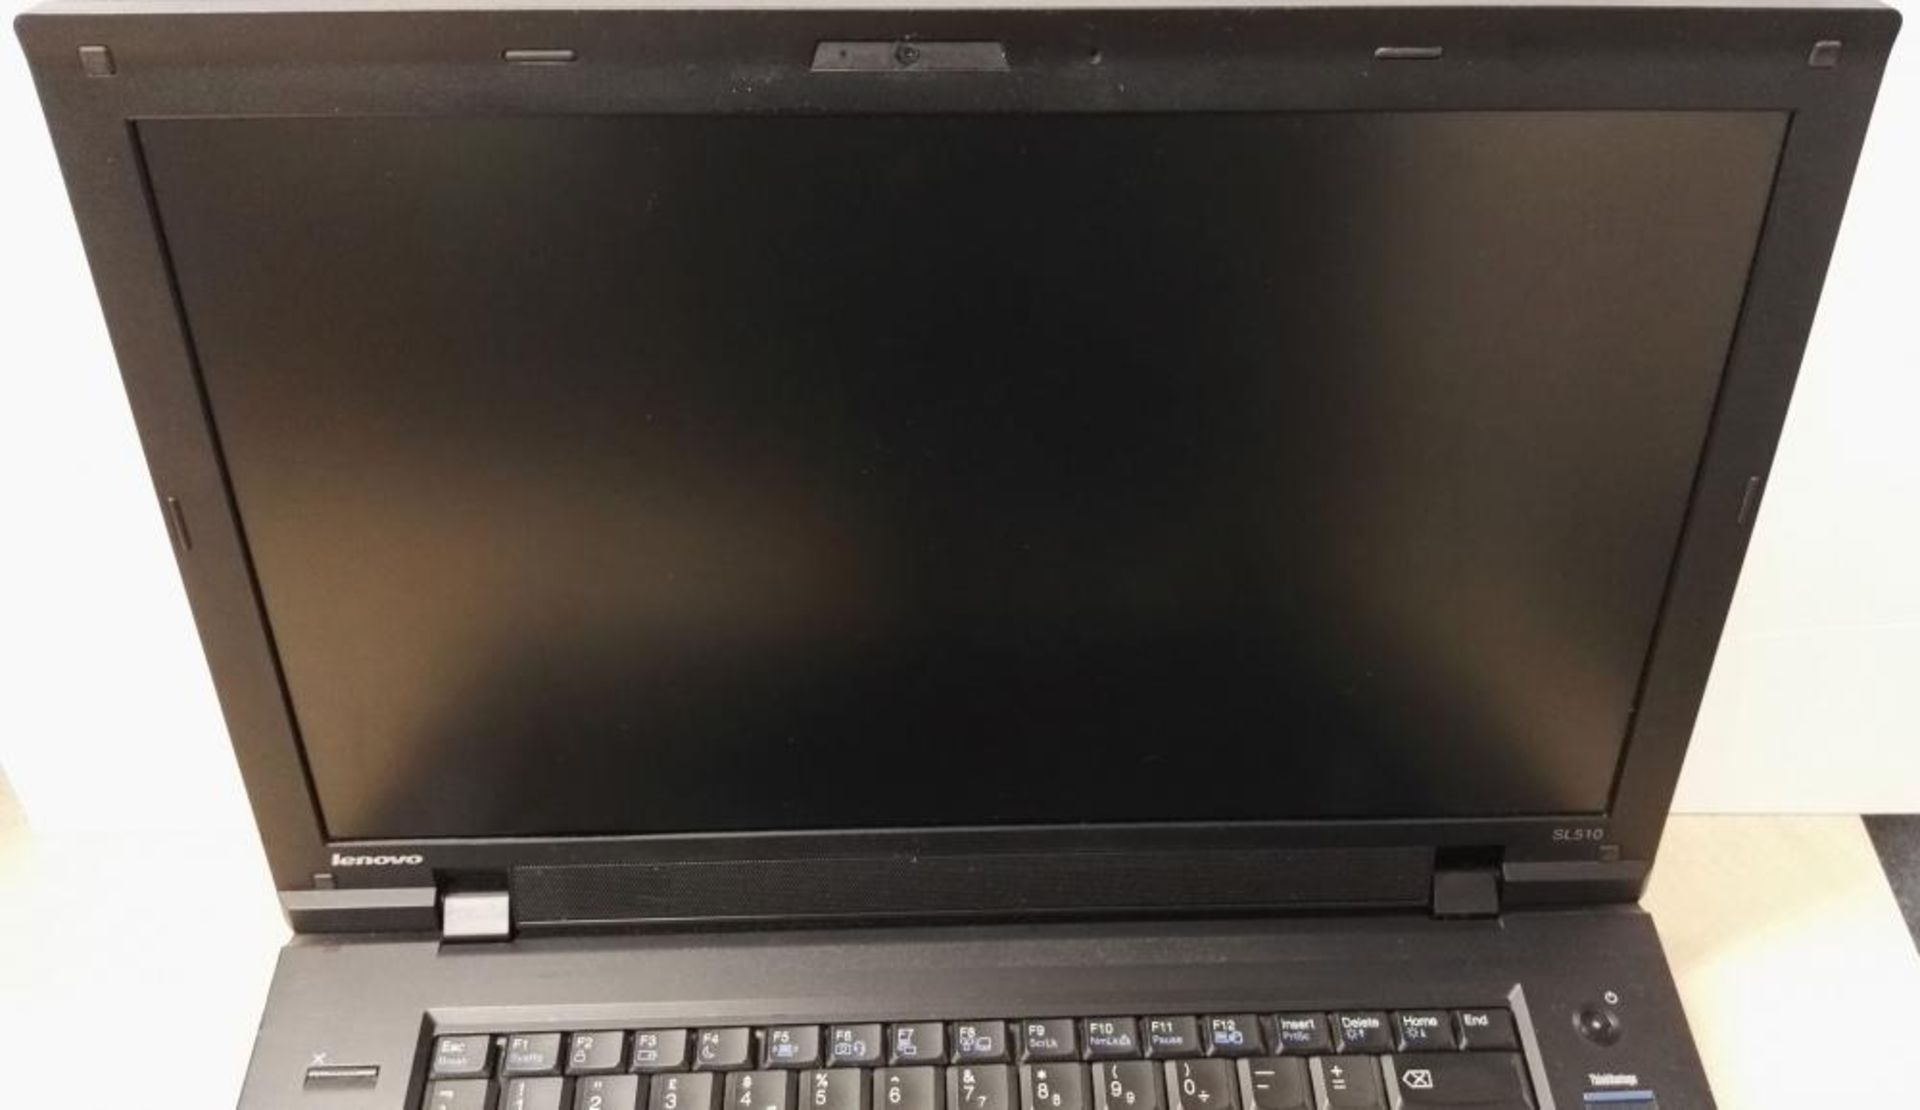 1 x Lenovo Thinkpad SL510 Laptop Computer - Features a 15.6 Inch Screen, Intel Core 2 Duo T6670 2.2g - Image 5 of 10